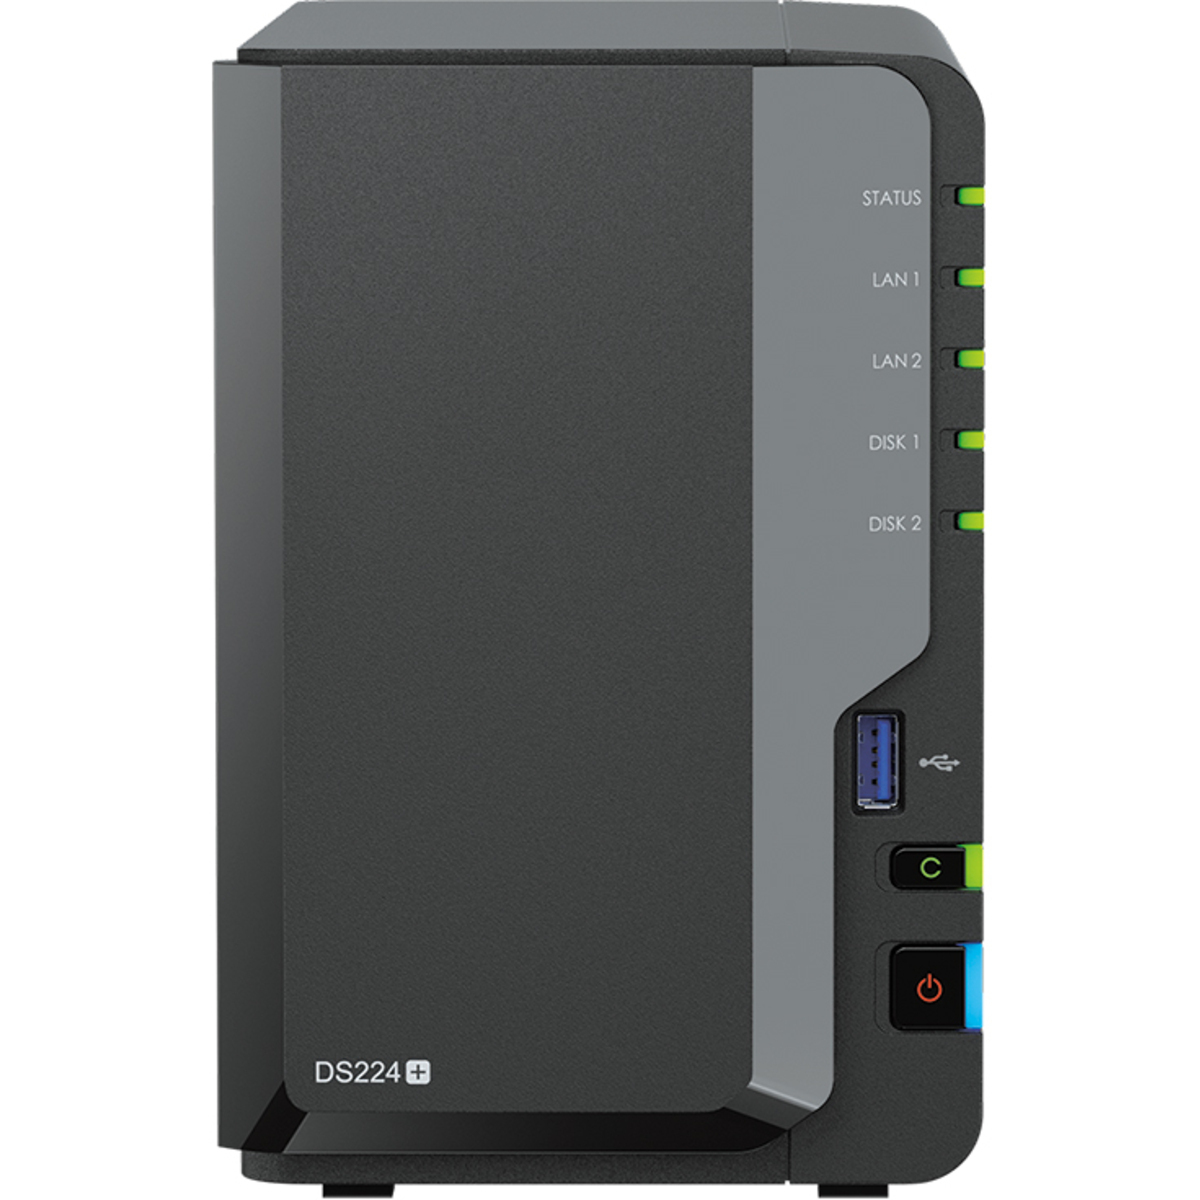 buy Synology DiskStation DS224+ 44tb Desktop NAS - Network Attached Storage Device 2x22000gb Seagate IronWolf Pro ST22000NT001 3.5 7200rpm SATA 6Gb/s HDD NAS Class Drives Installed - Burn-In Tested - ON SALE - FREE RAM UPGRADE - nas headquarters buy network attached storage server device das new raid-5 free shipping usa spring sale DiskStation DS224+